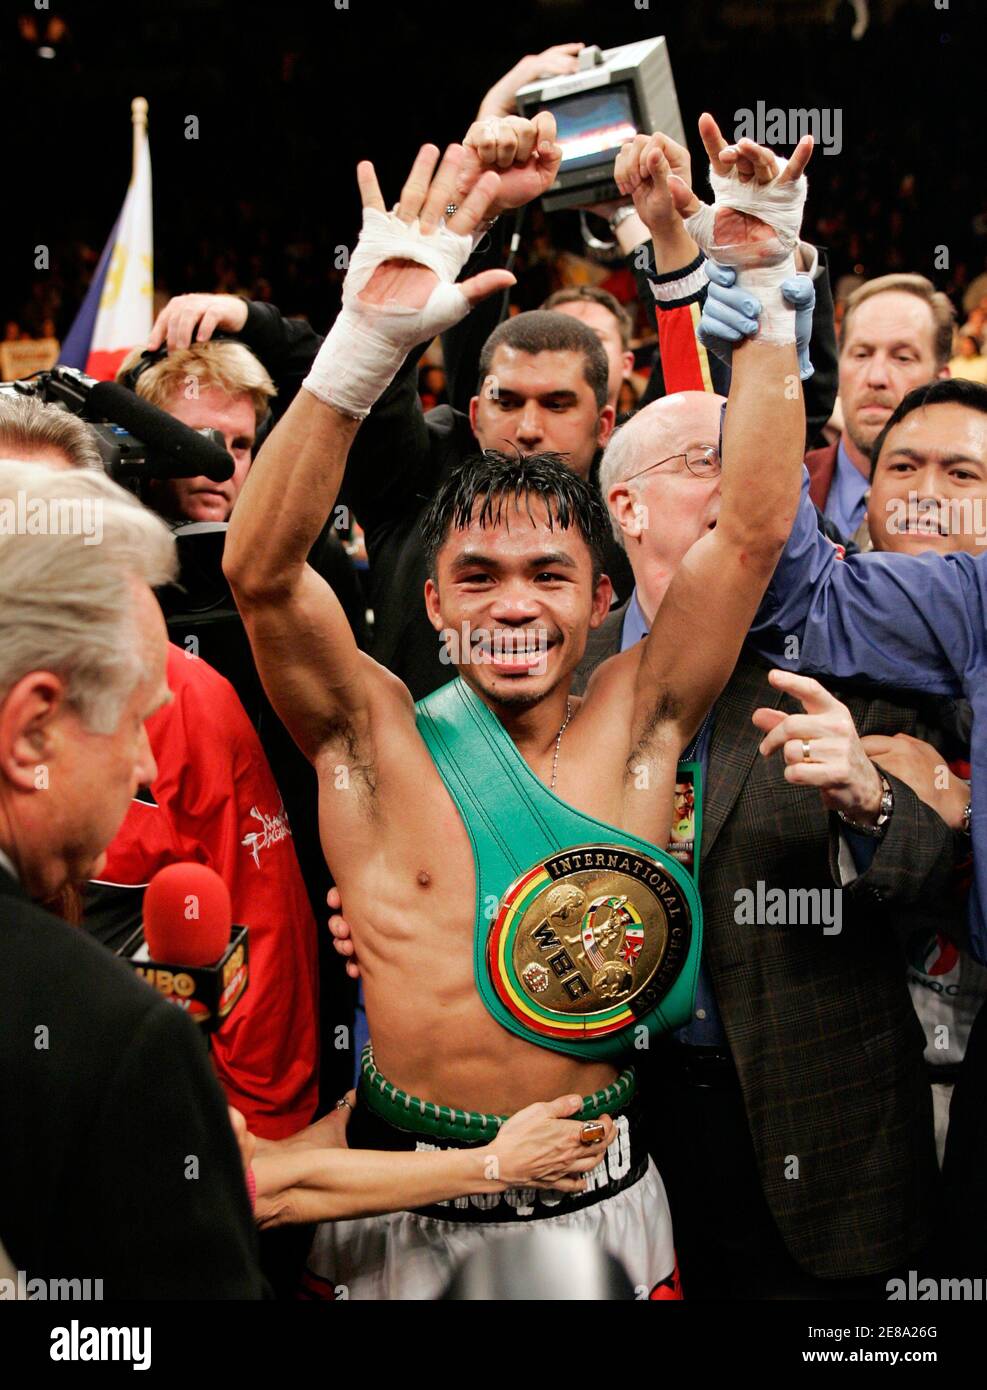 Super featherweight boxer Manny Pacquiao of Cebu City, Philippines, celebrates his win over Erik Morales of Tijuana, Mexico, at the Thomas & Mack Center in Las Vegas Nevada January 21, 2006. Pacquiao won the fight with a 10th round TKO. REUTERS/Steve Marcus Stock Photo